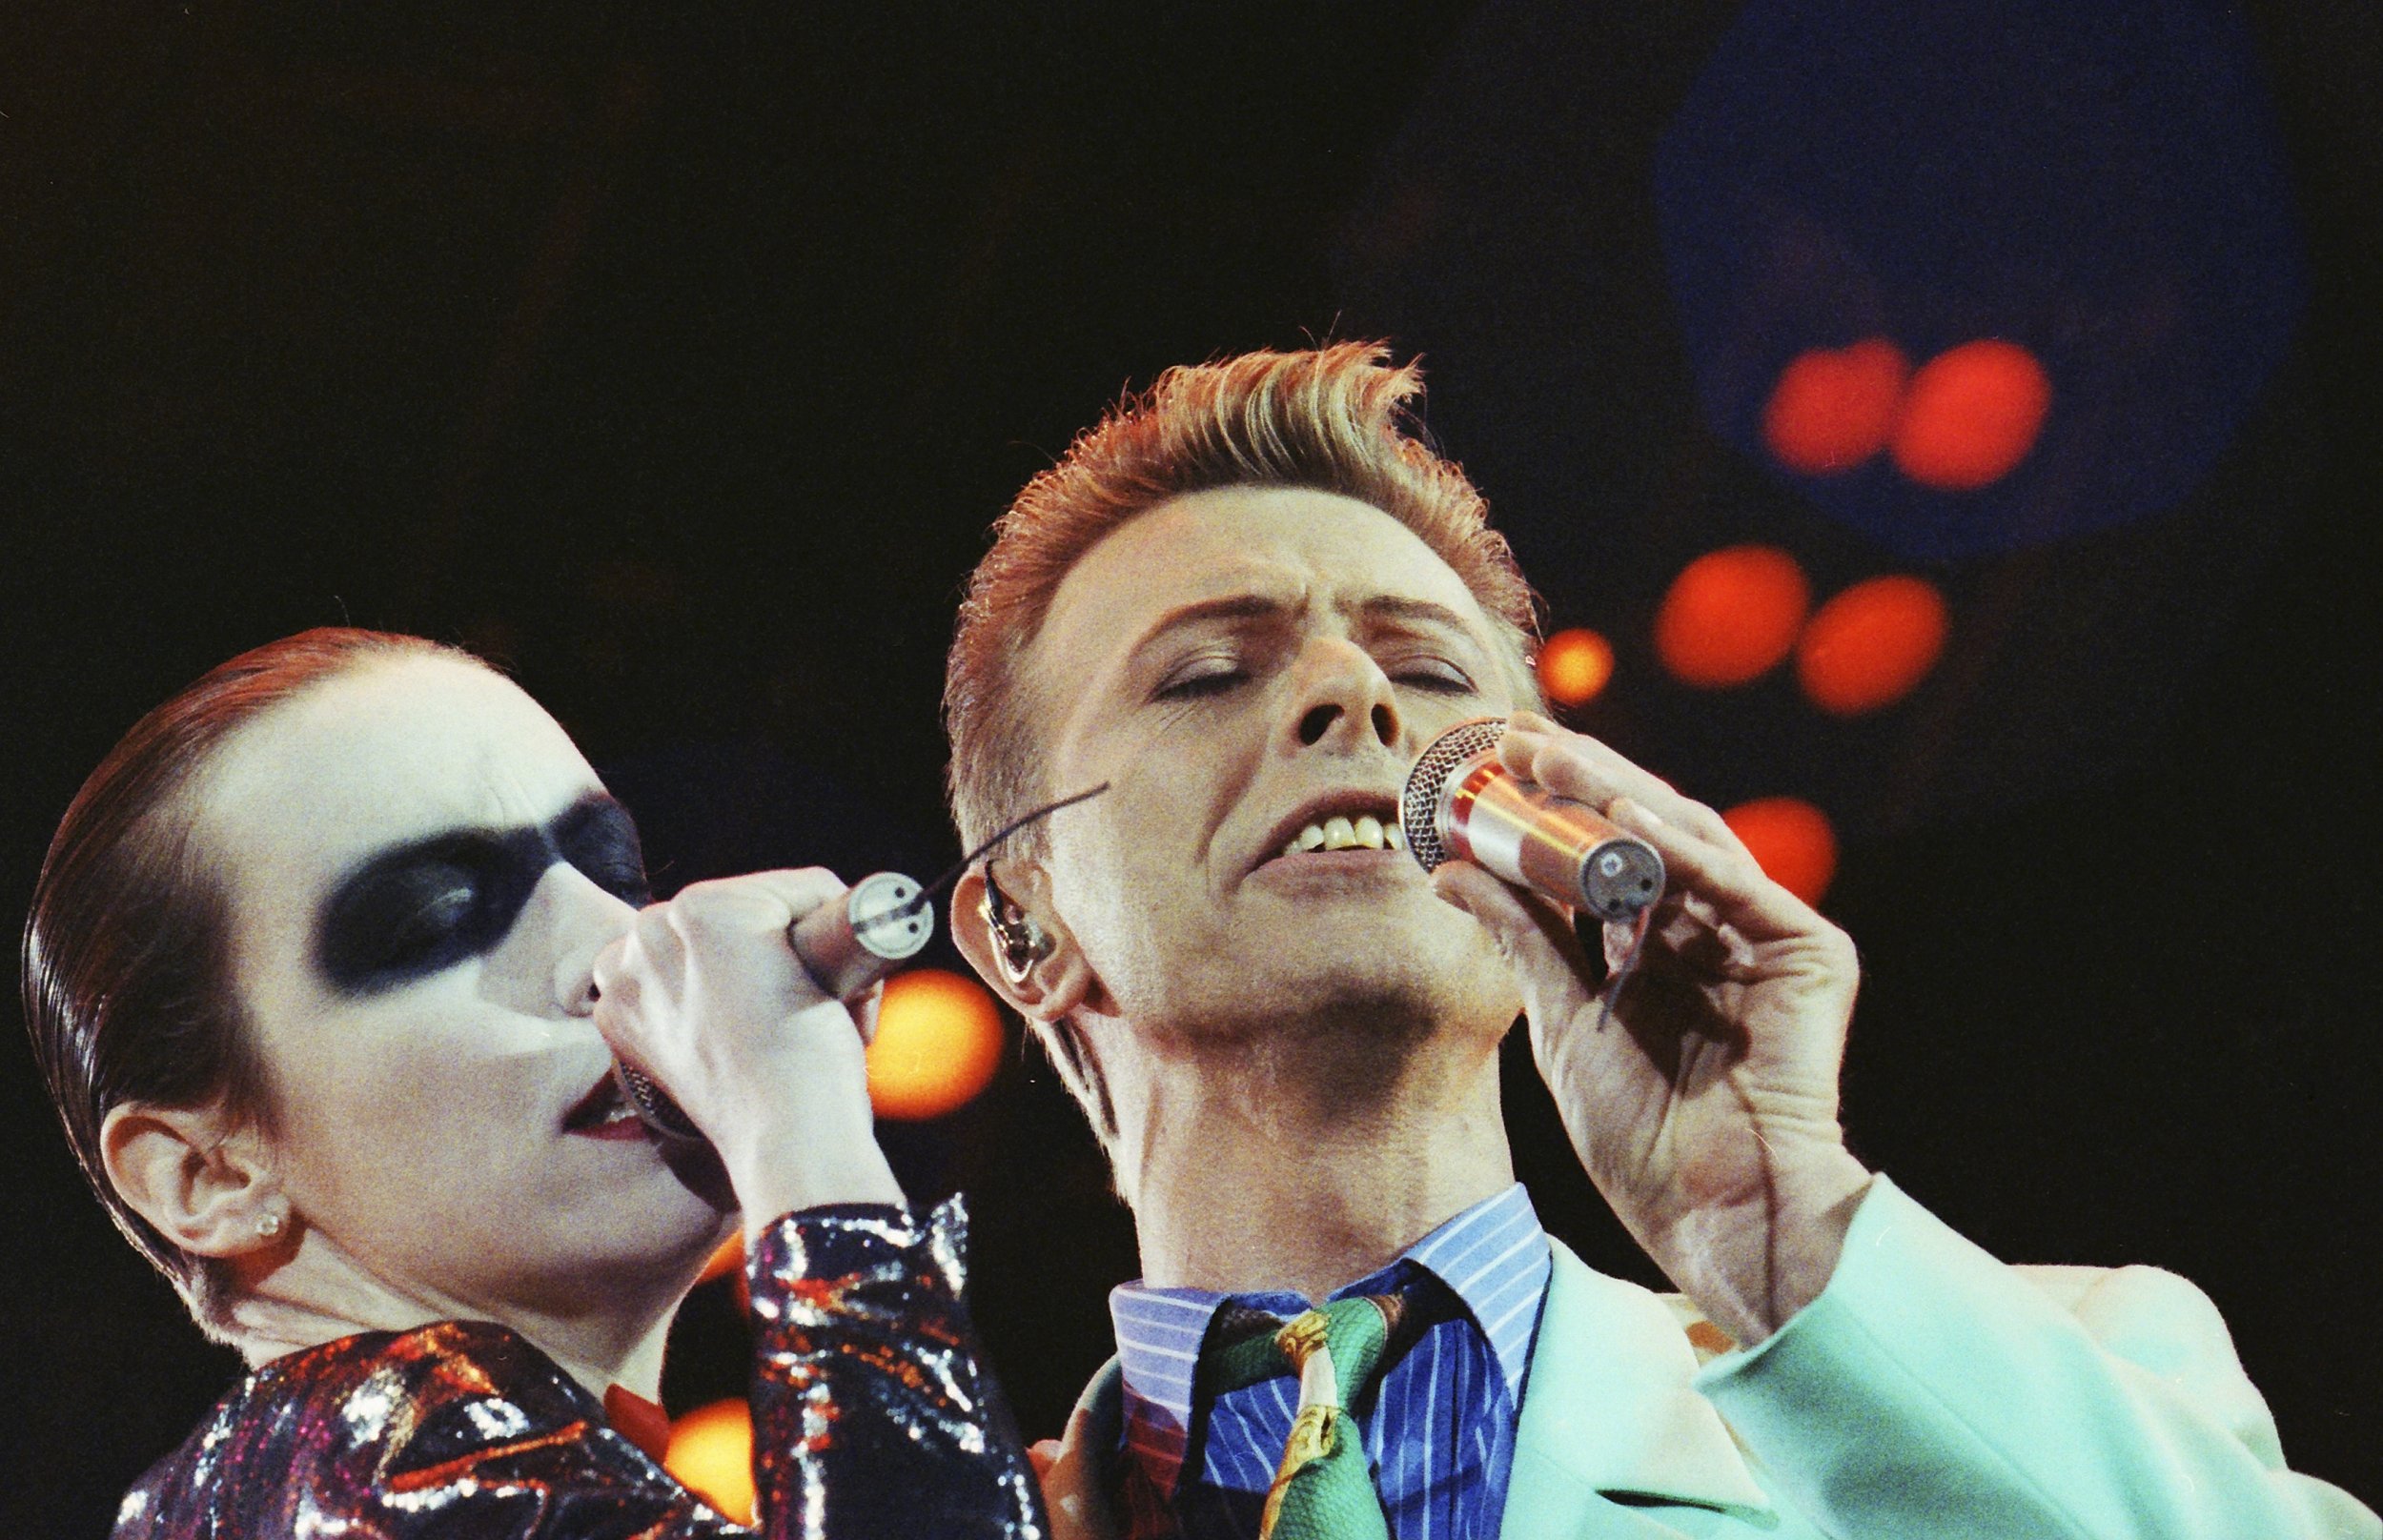 David Bowie's Years as a Rock Recluse